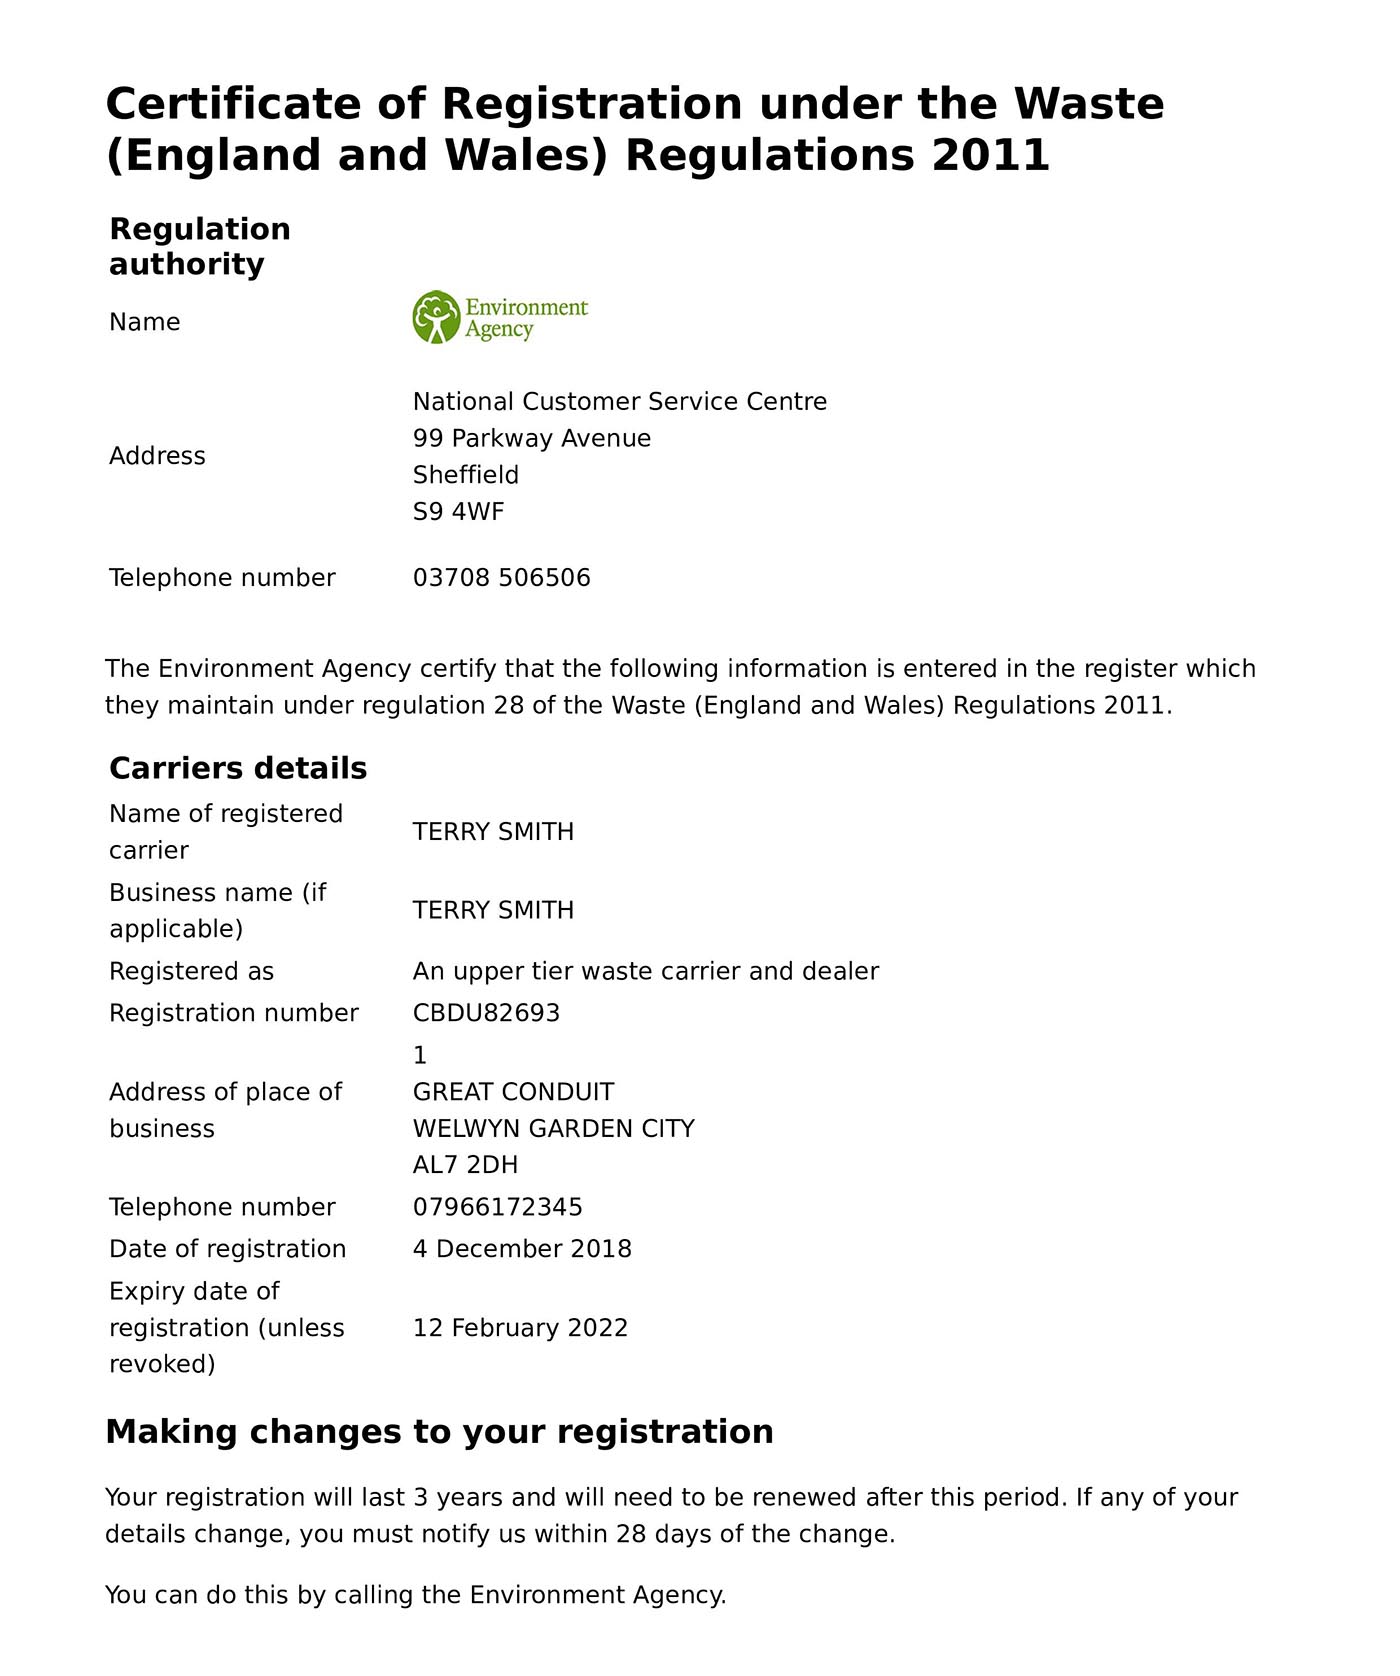 Certificate of Registration under the Waste (England and Wales) Regulations 2011 - Fencing Contractors Welwyn Garden City